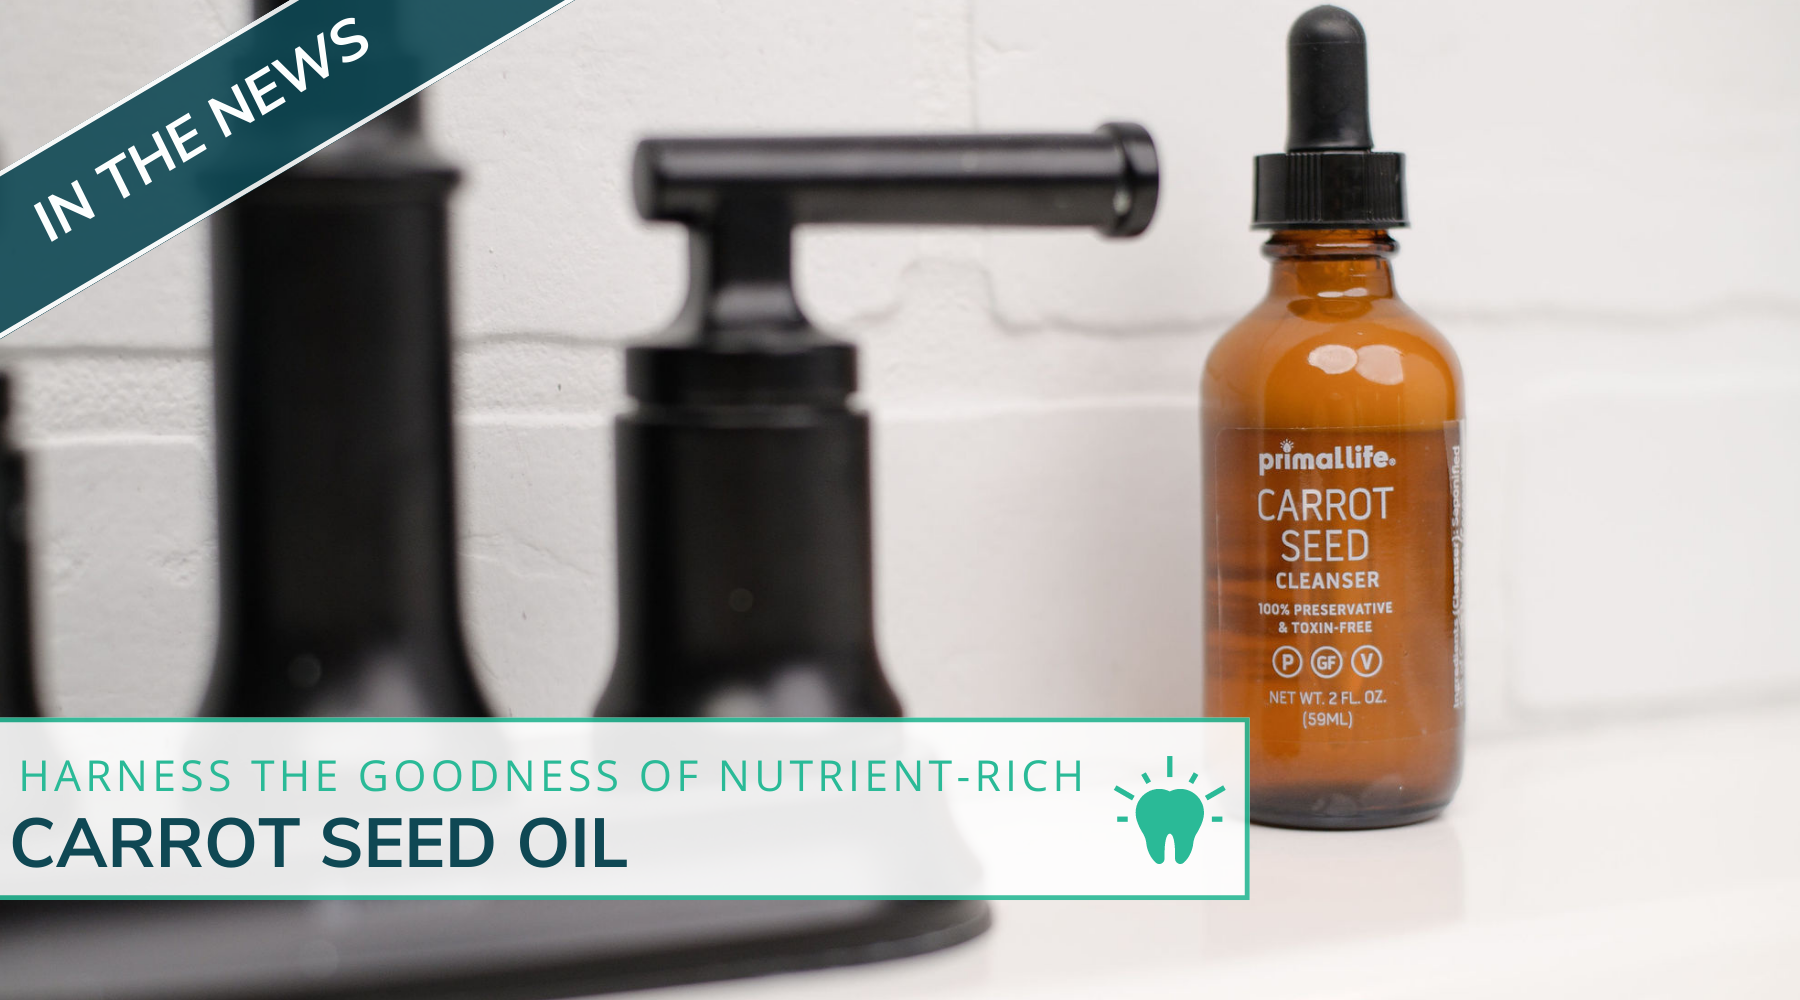 Harness The Goodness Of Nutrient-Rich Carrot Seed Oil